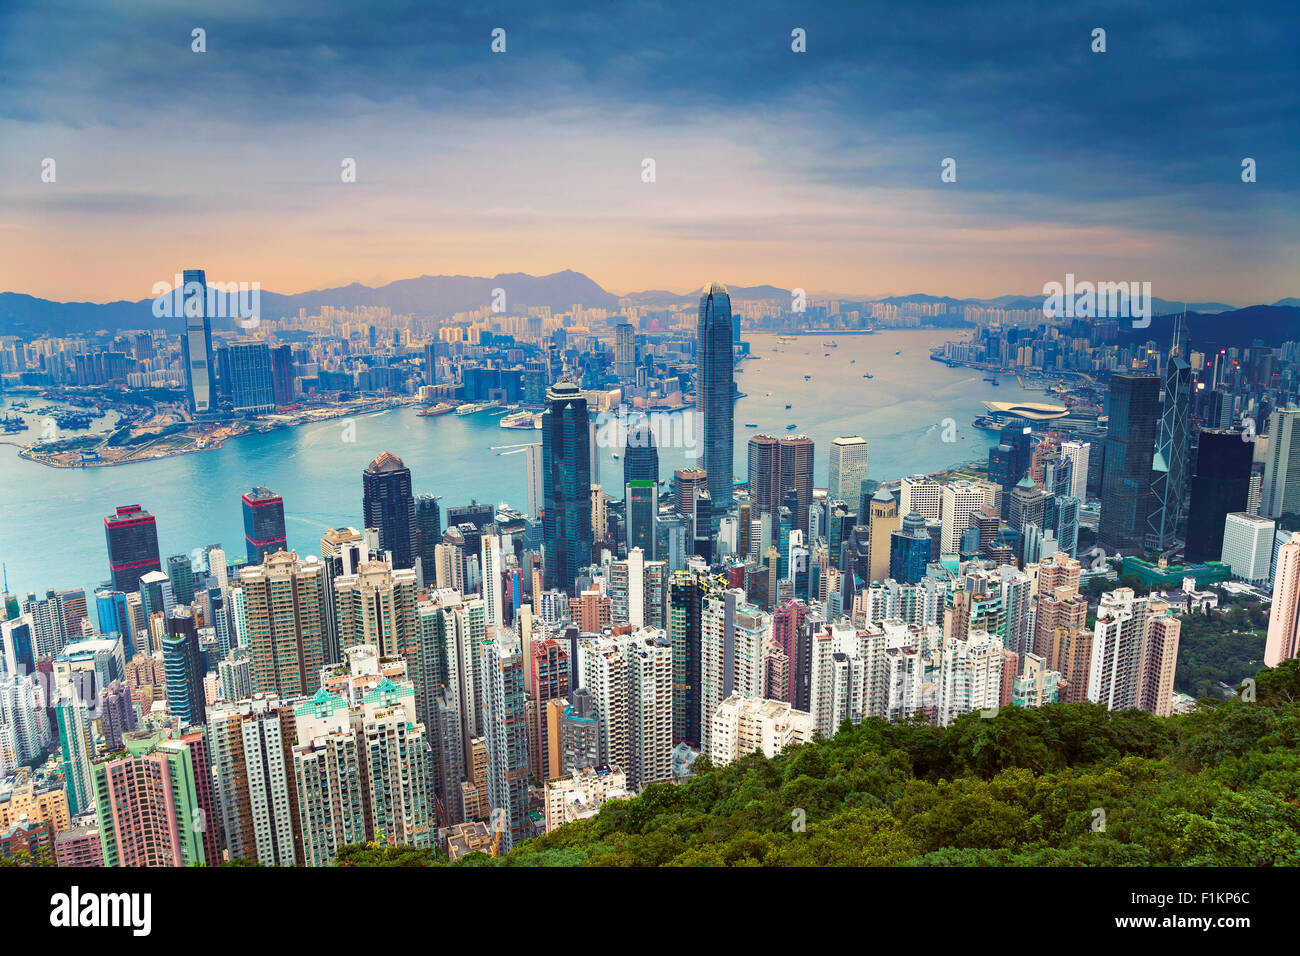 Image of Hong Kong skyline view from Victoria Peak. Stock Photo